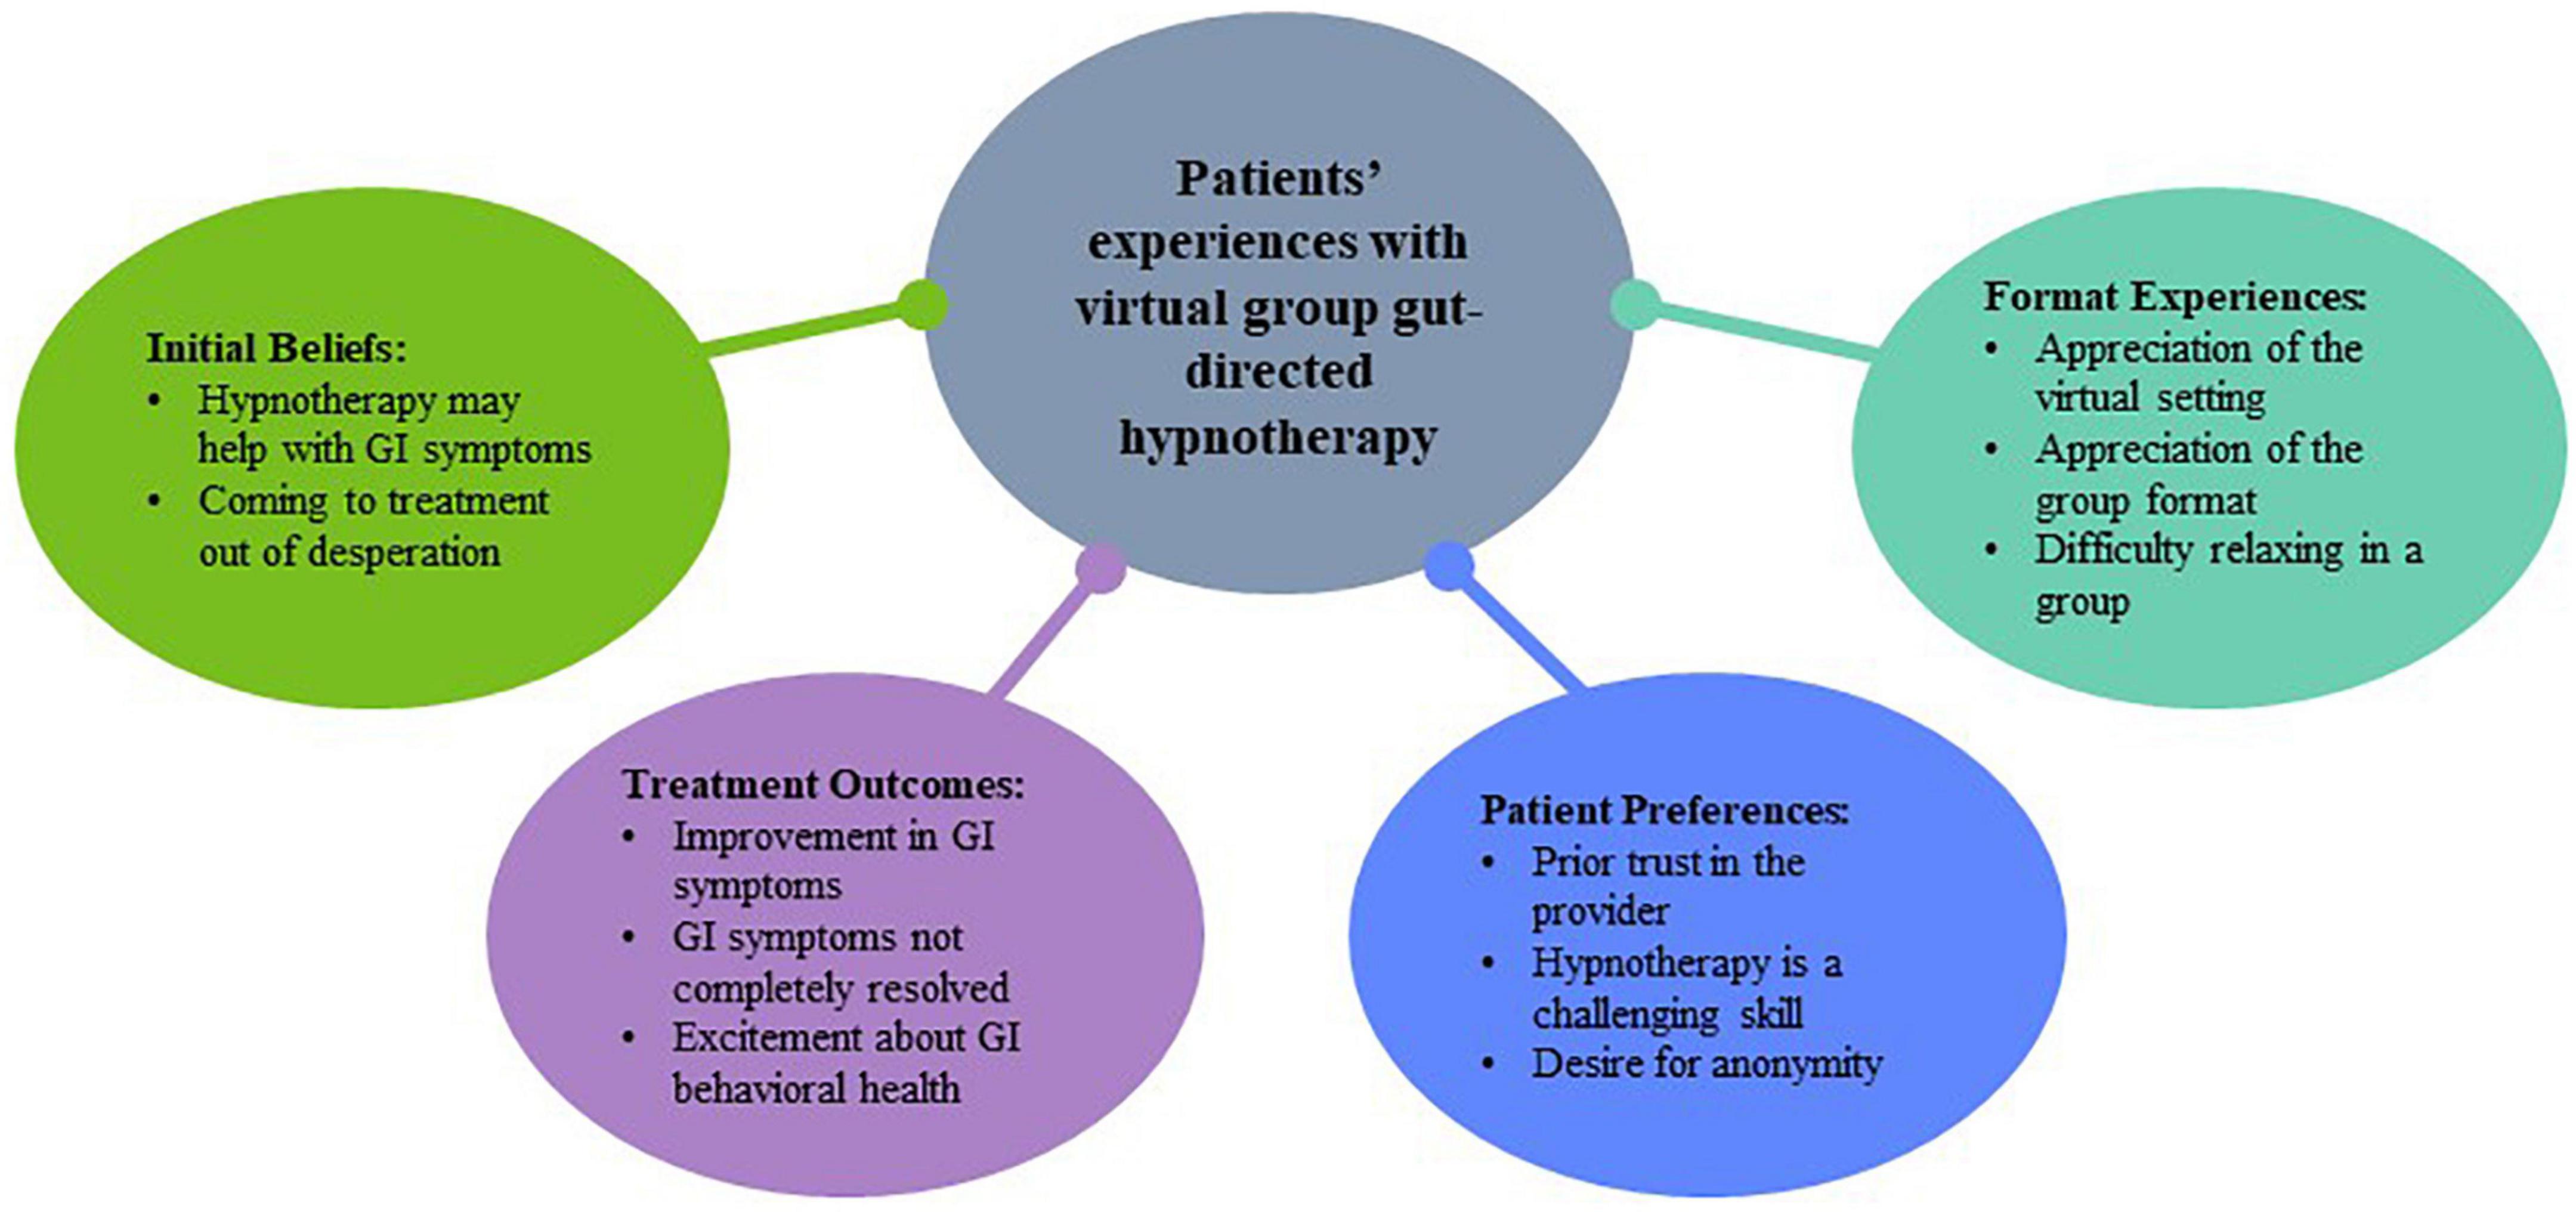 Patients’ experiences with virtual group gut-directed hypnotherapy: A qualitative study